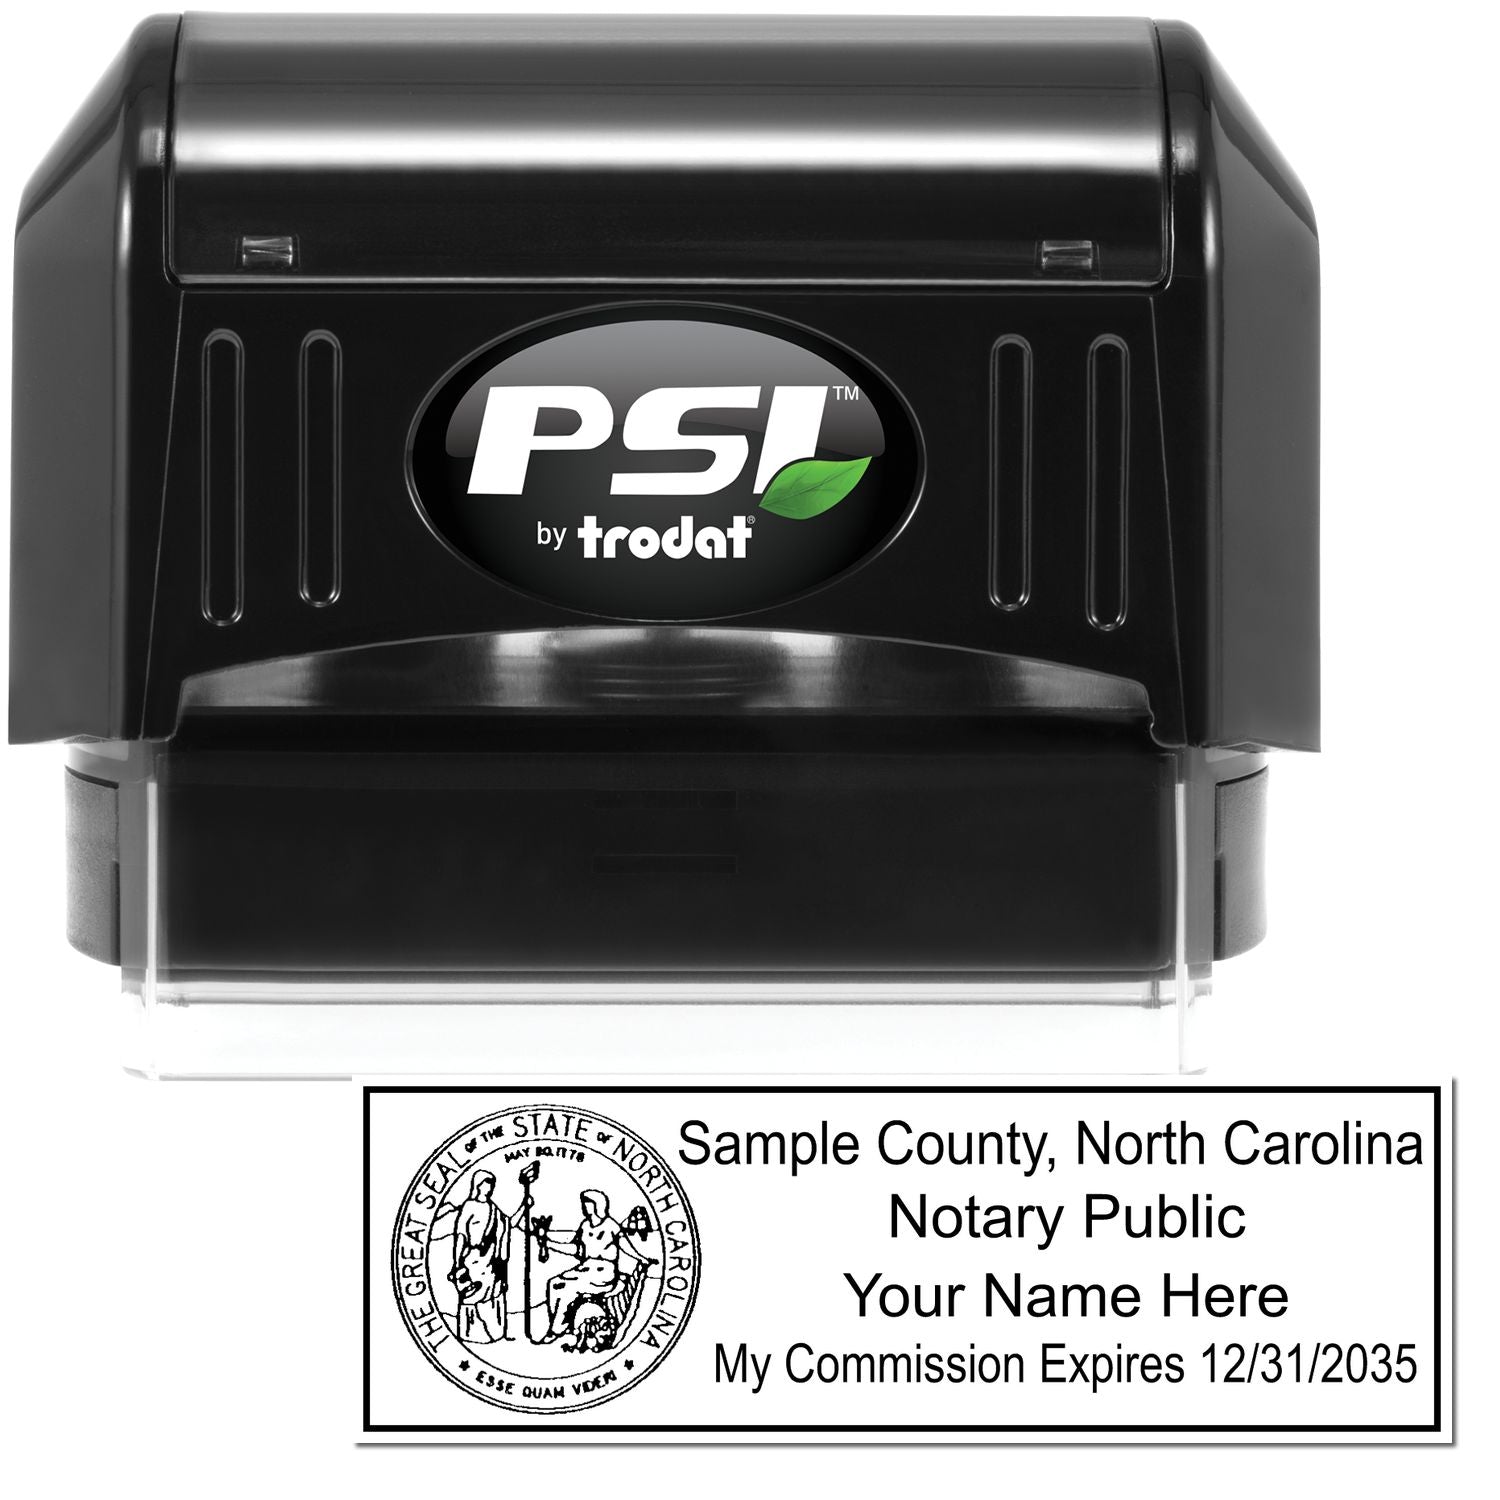 The main image for the PSI North Carolina Notary Stamp depicting a sample of the imprint and electronic files